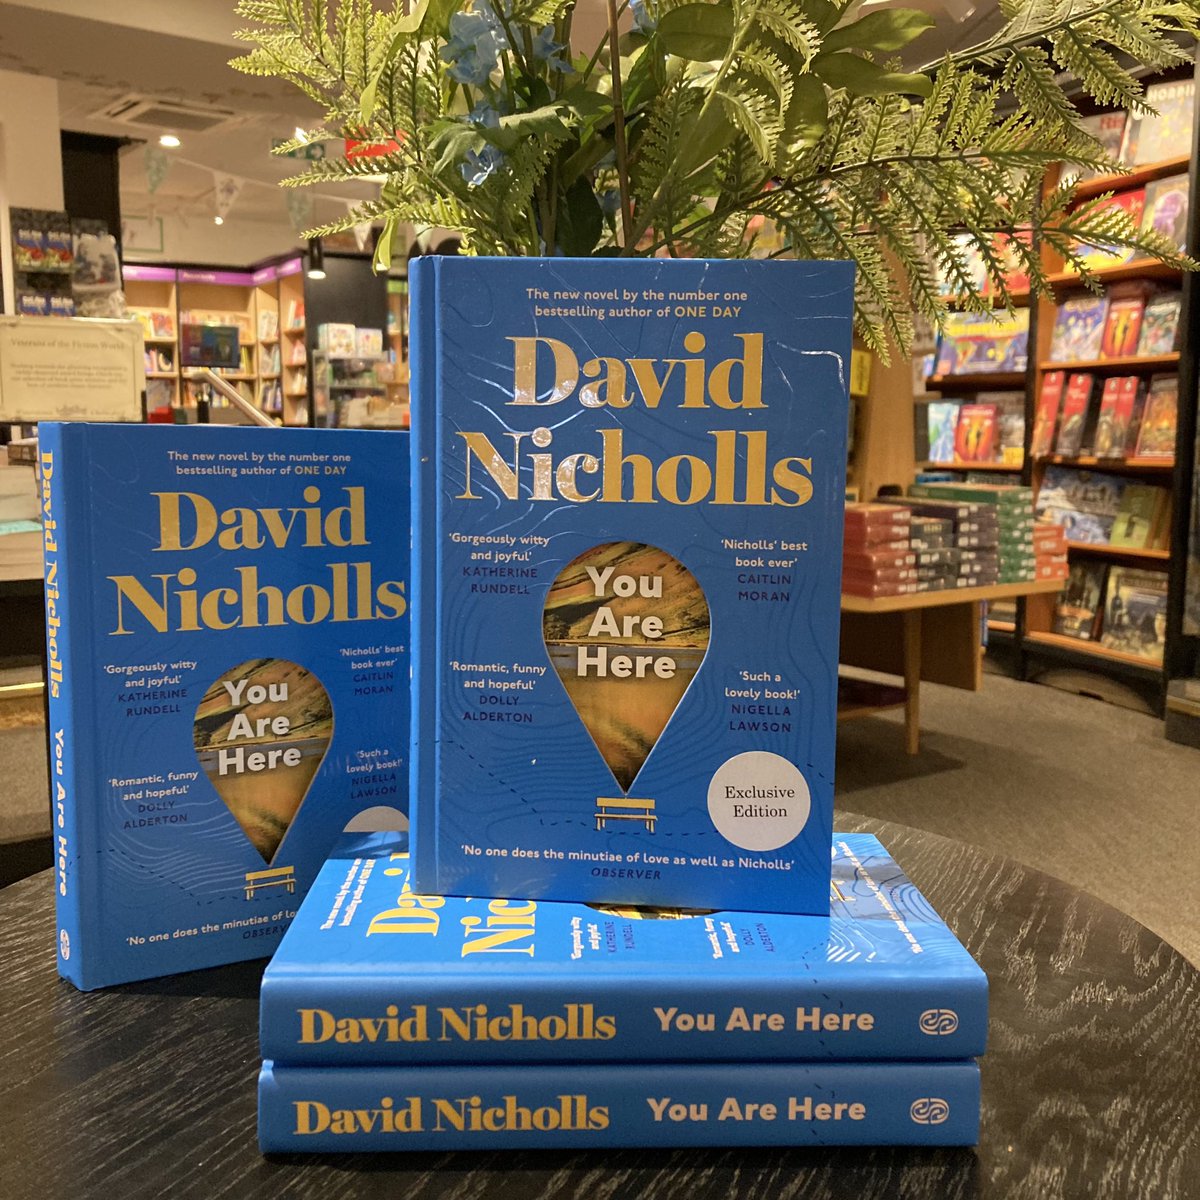 We know just where you should be tomorrow. From the author of #OneDay David Nicholls comes his glorious new novel ‘You Are Here.’ Released tomorrow we’ve got some beautiful exclusive editions in stock. Witty, joyful and of course, funny this will warm your soul. #chelmsford